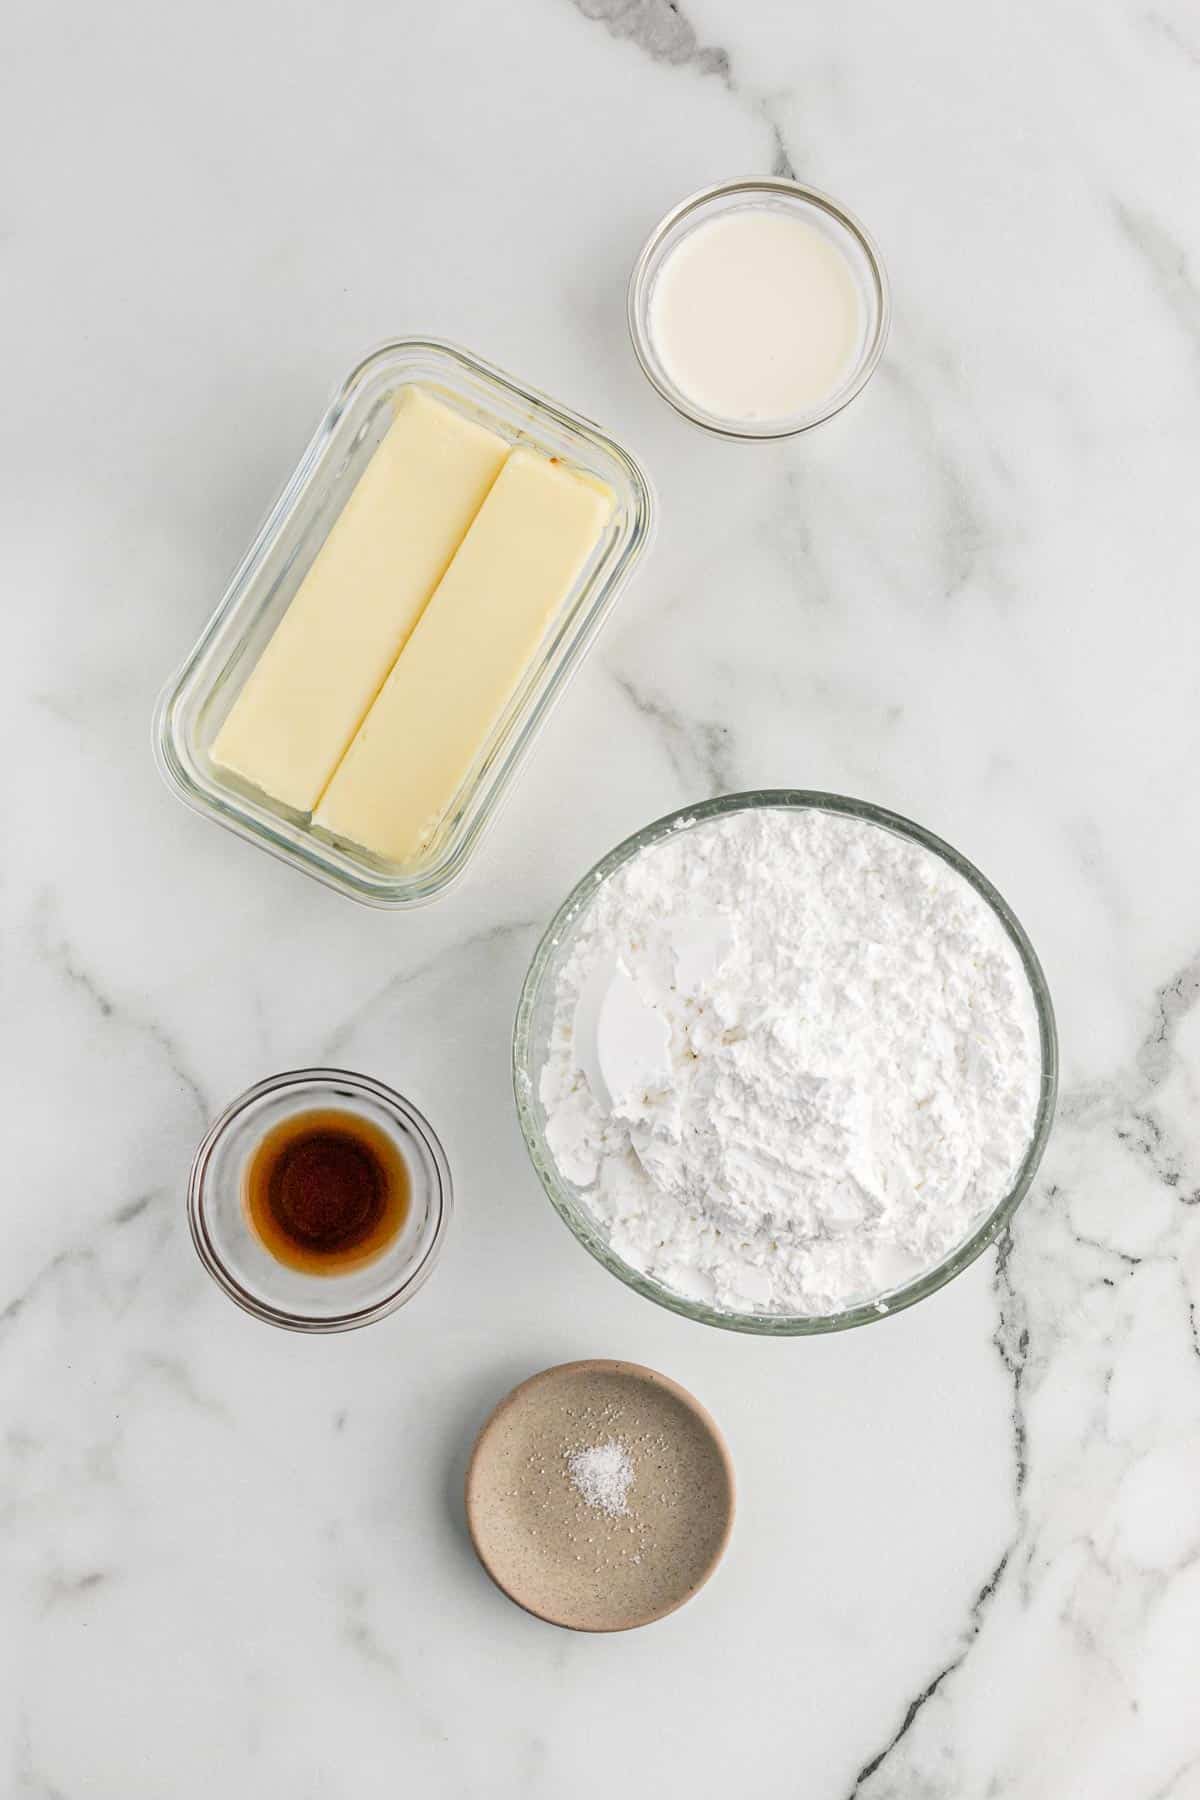 Ingredients to make American buttercream frosting on the table.